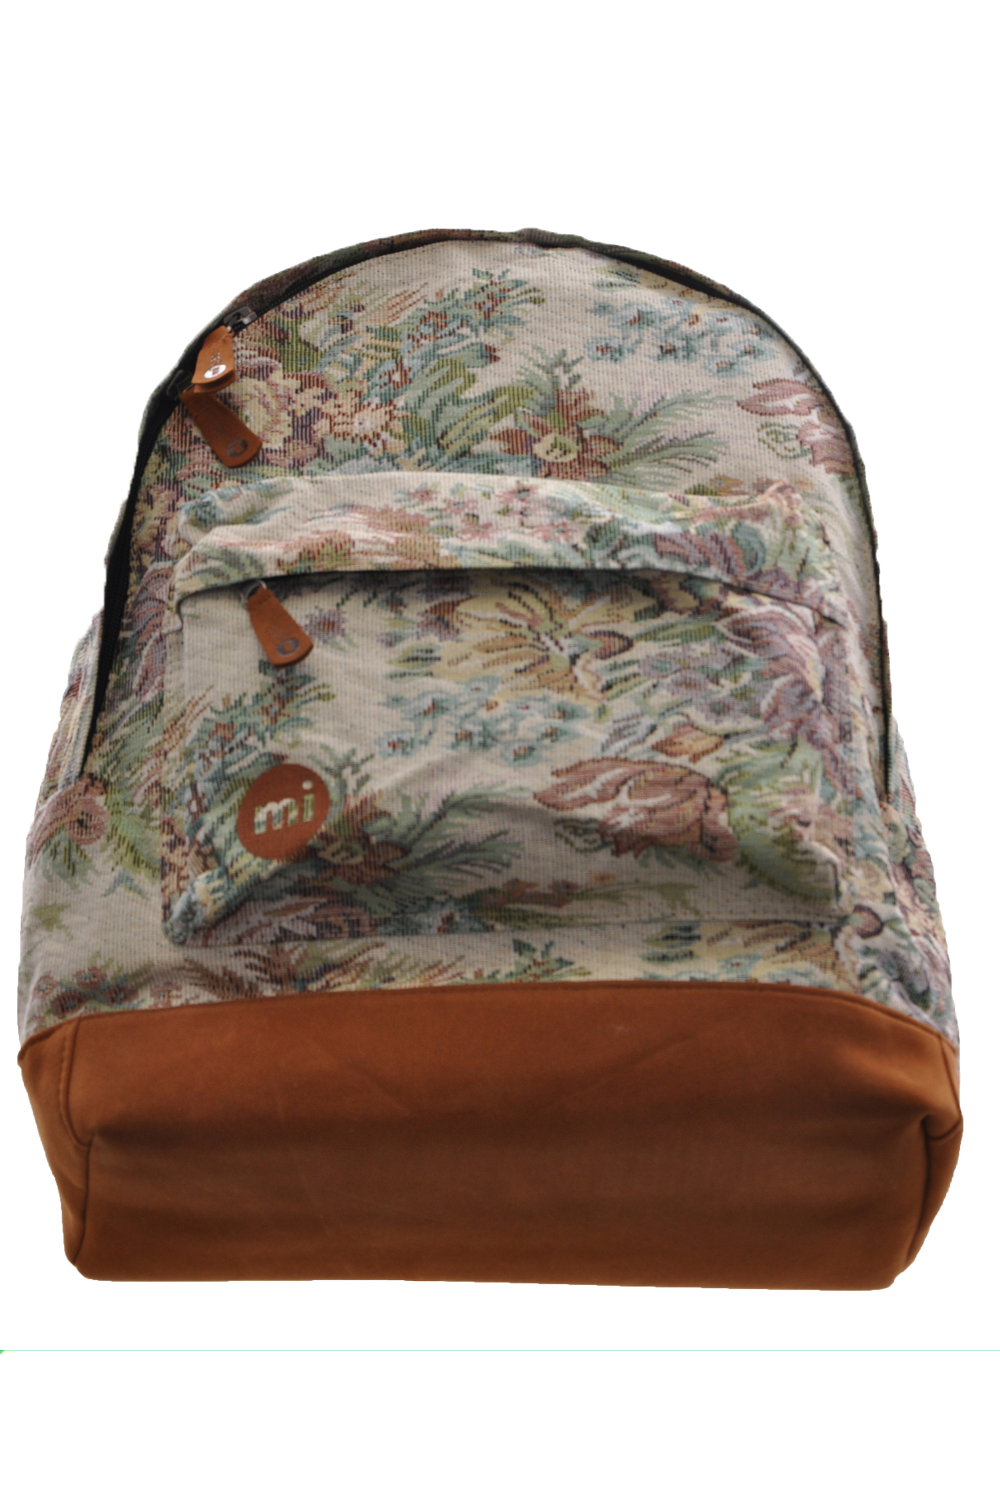 Picture of Mi-Pac Tapestry Backpack 740320